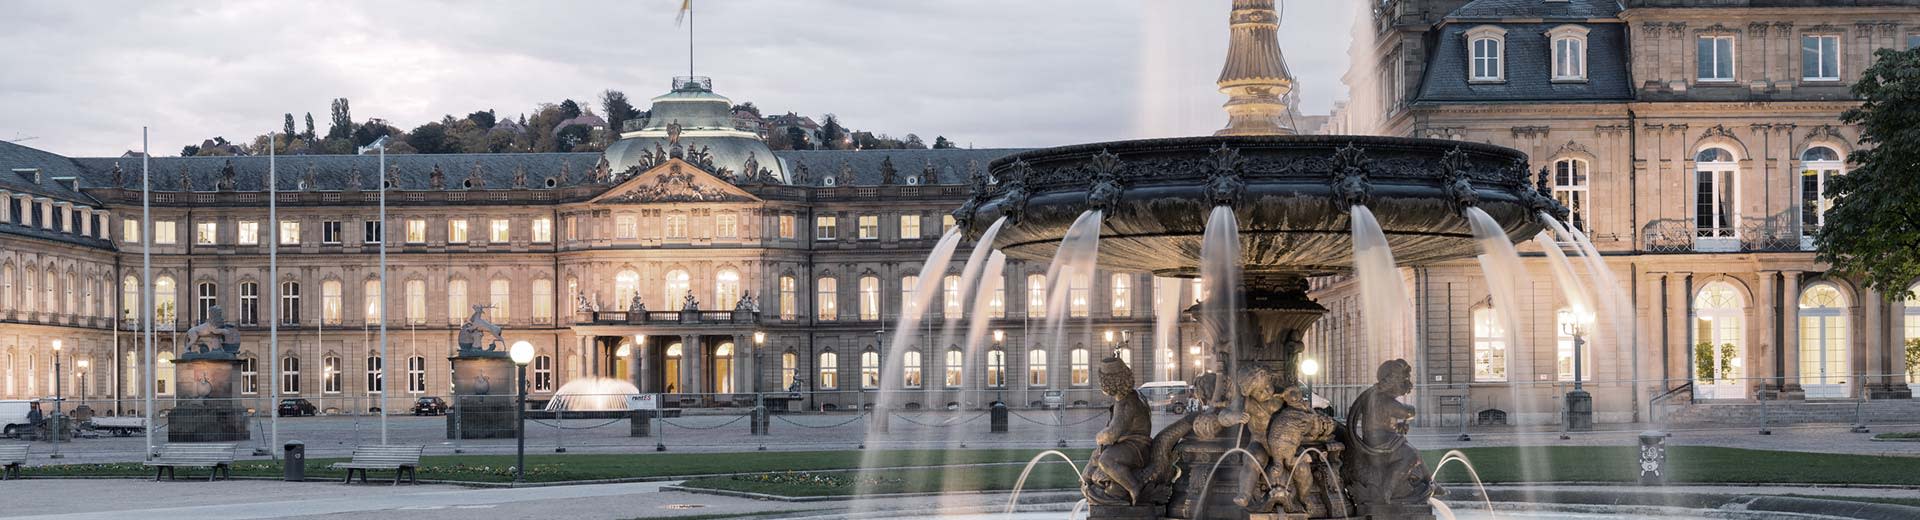 A beautiful fountain dominates the foreground, while behind stands a historic building in the half-light of a Stuttgart evening.